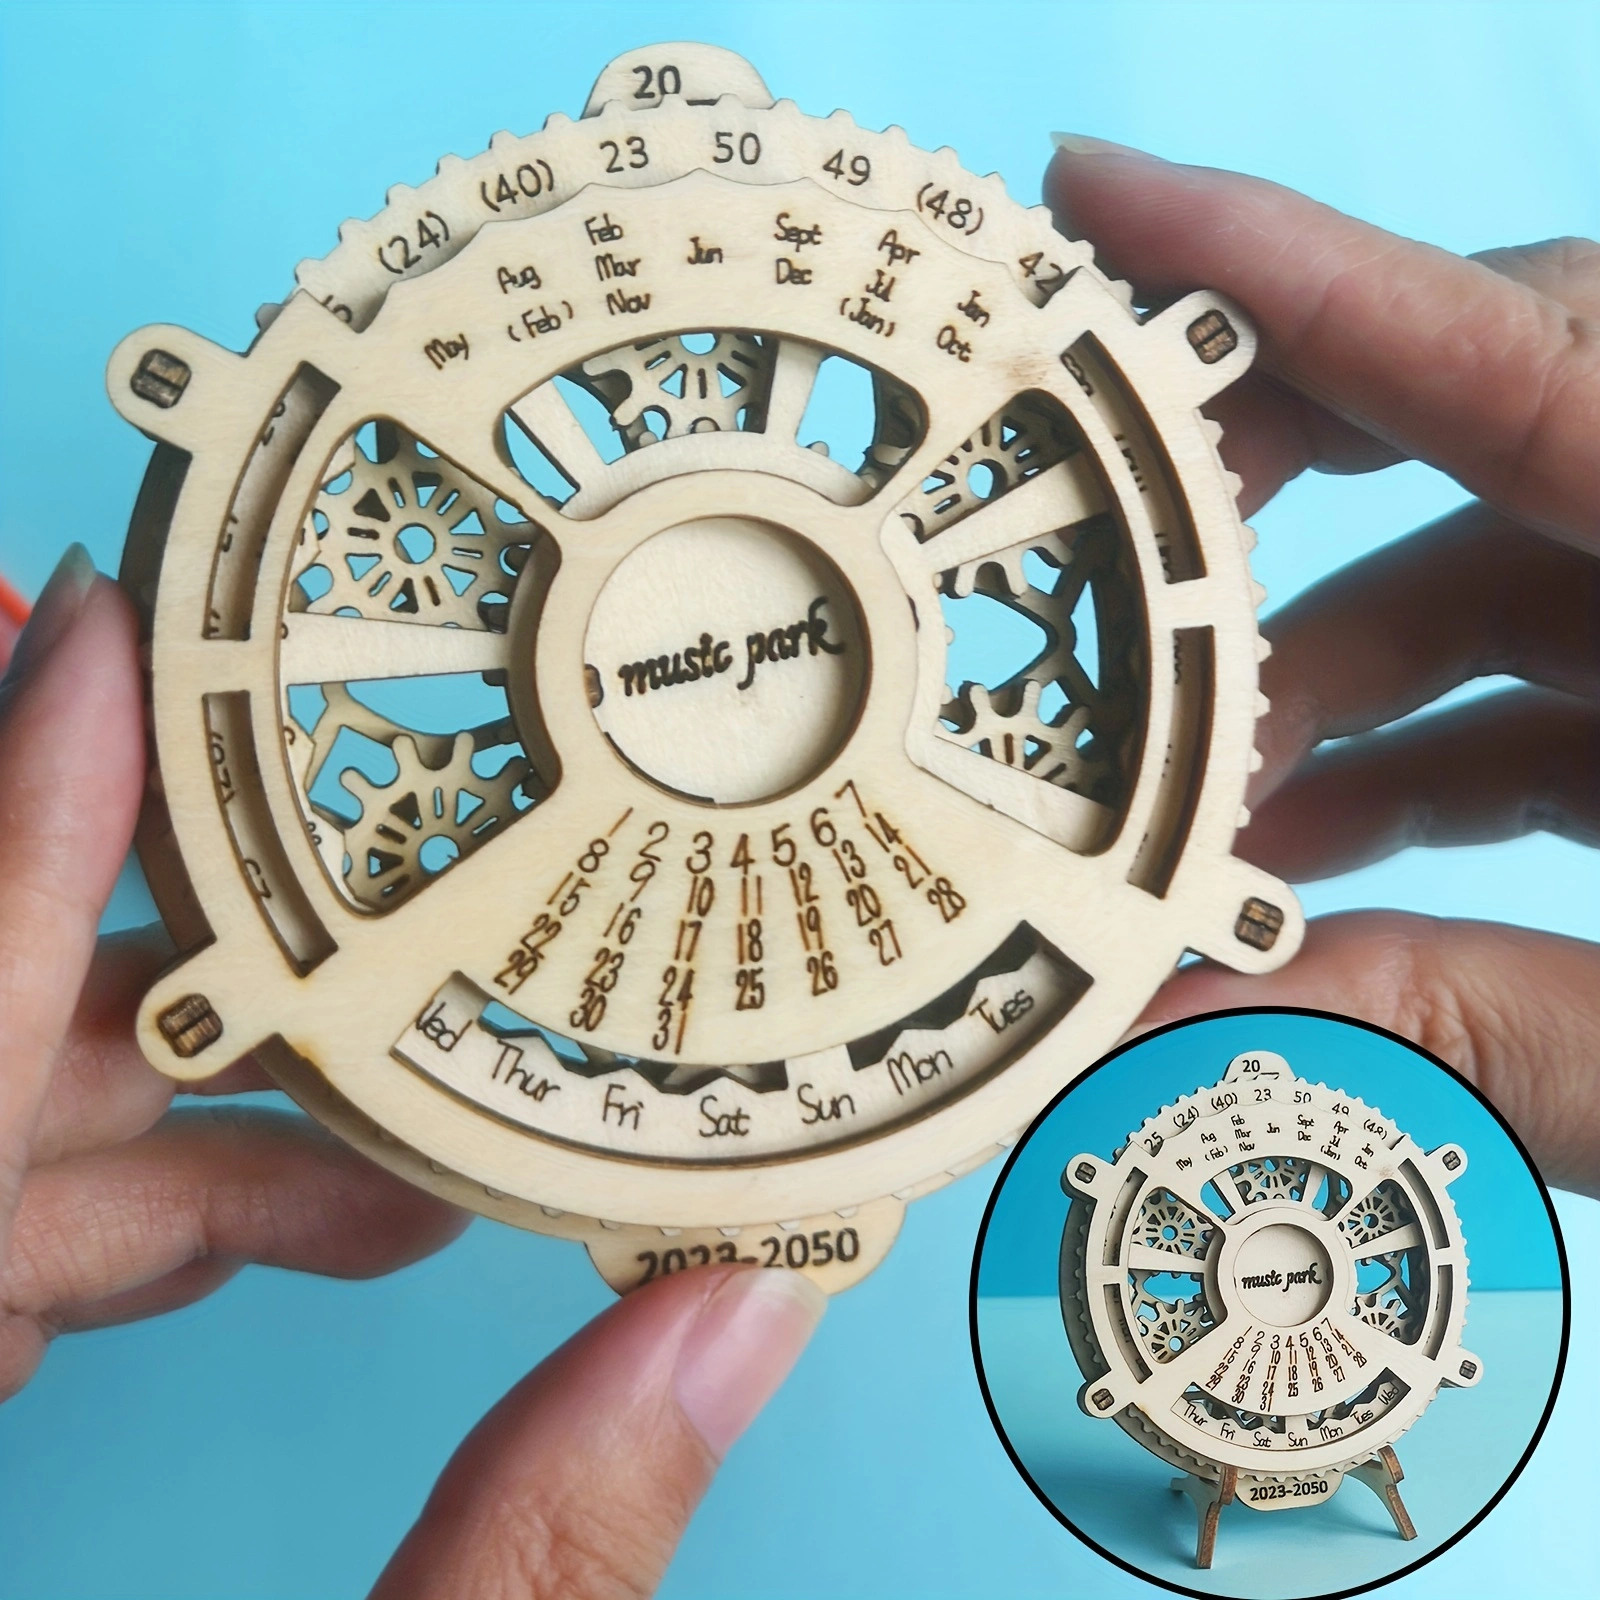 

3d Wooden Puzzle Perpetual Calendar Mechanical Gears Toy Building Set Engineering Toys Model Kits Handmade